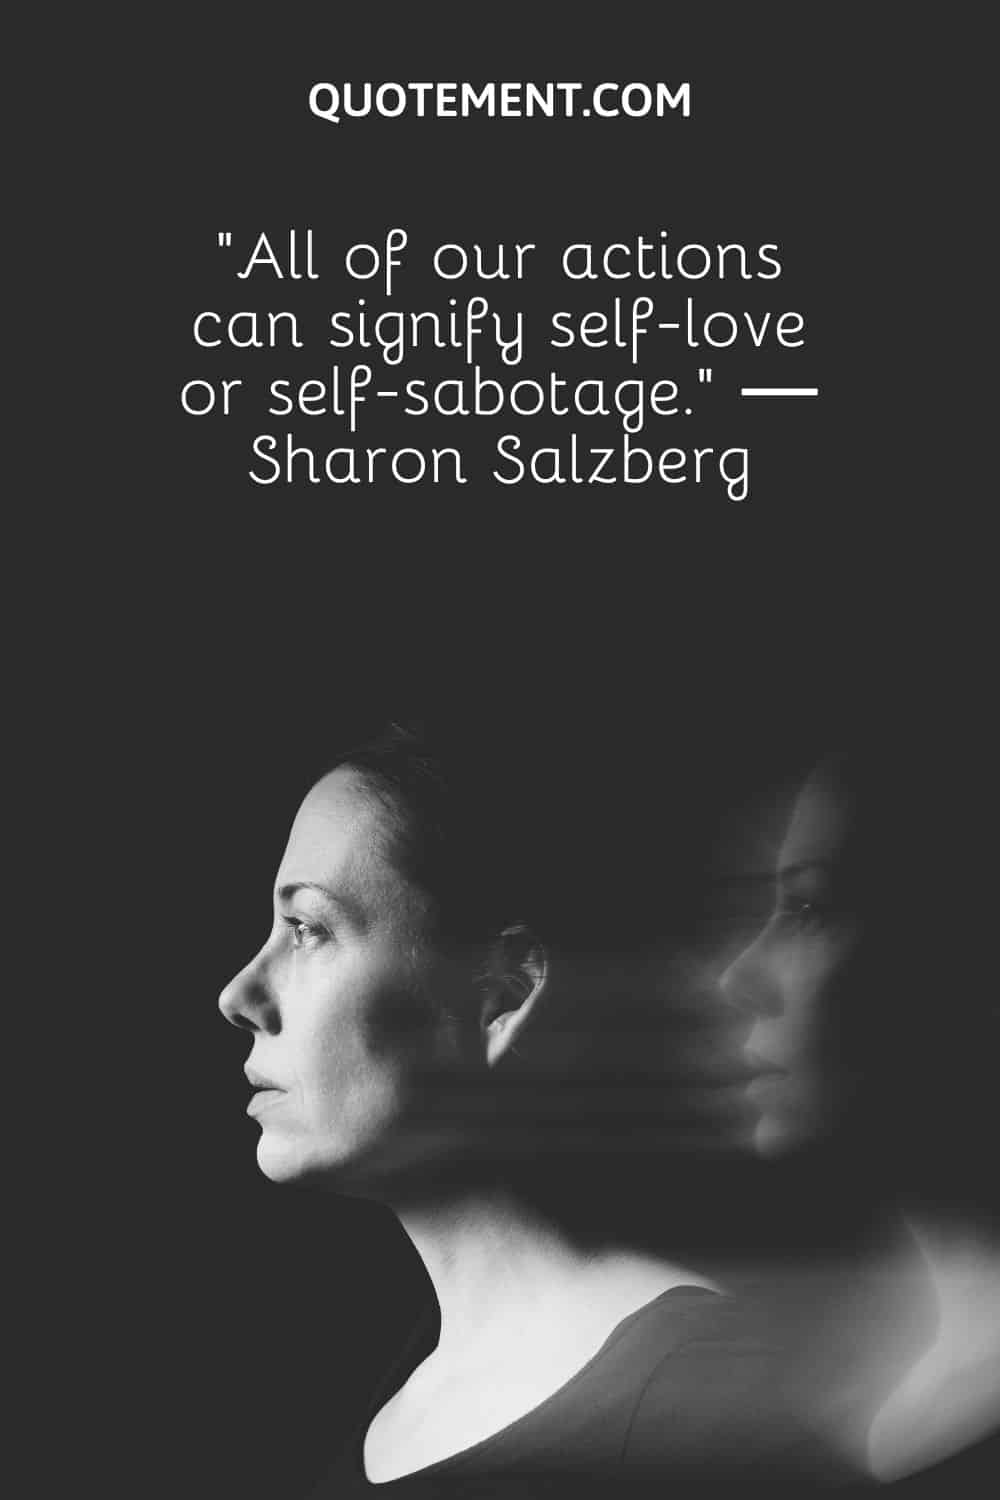 “All of our actions can signify self-love or self-sabotage.” ― Sharon Salzberg